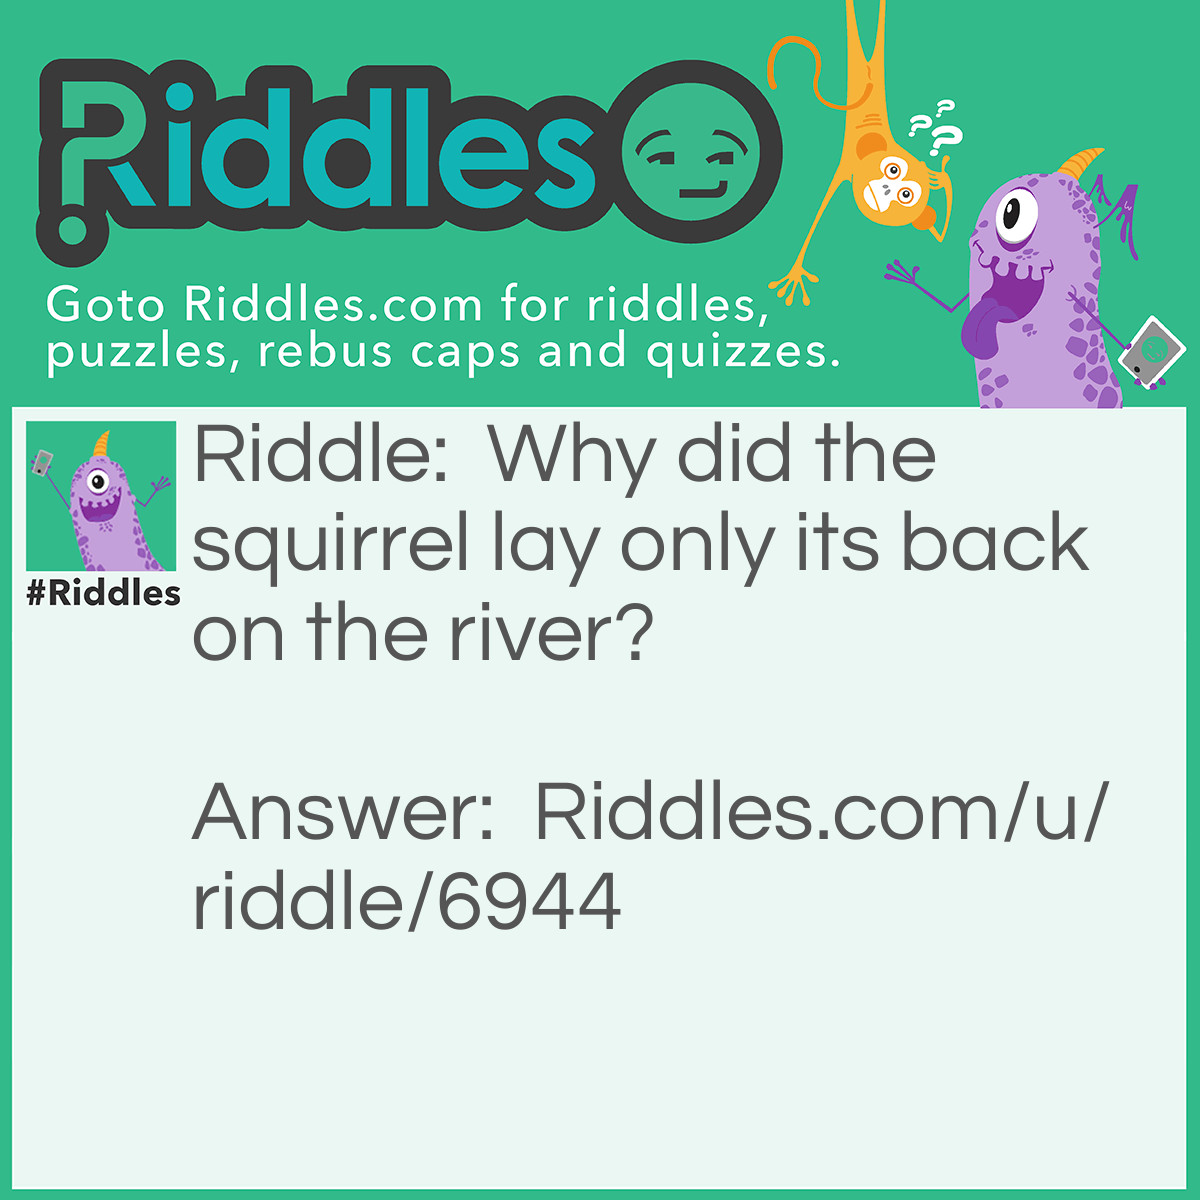 Riddle: Why did the squirrel lay only its back on the river? Answer: To keep its "nuts" dry.